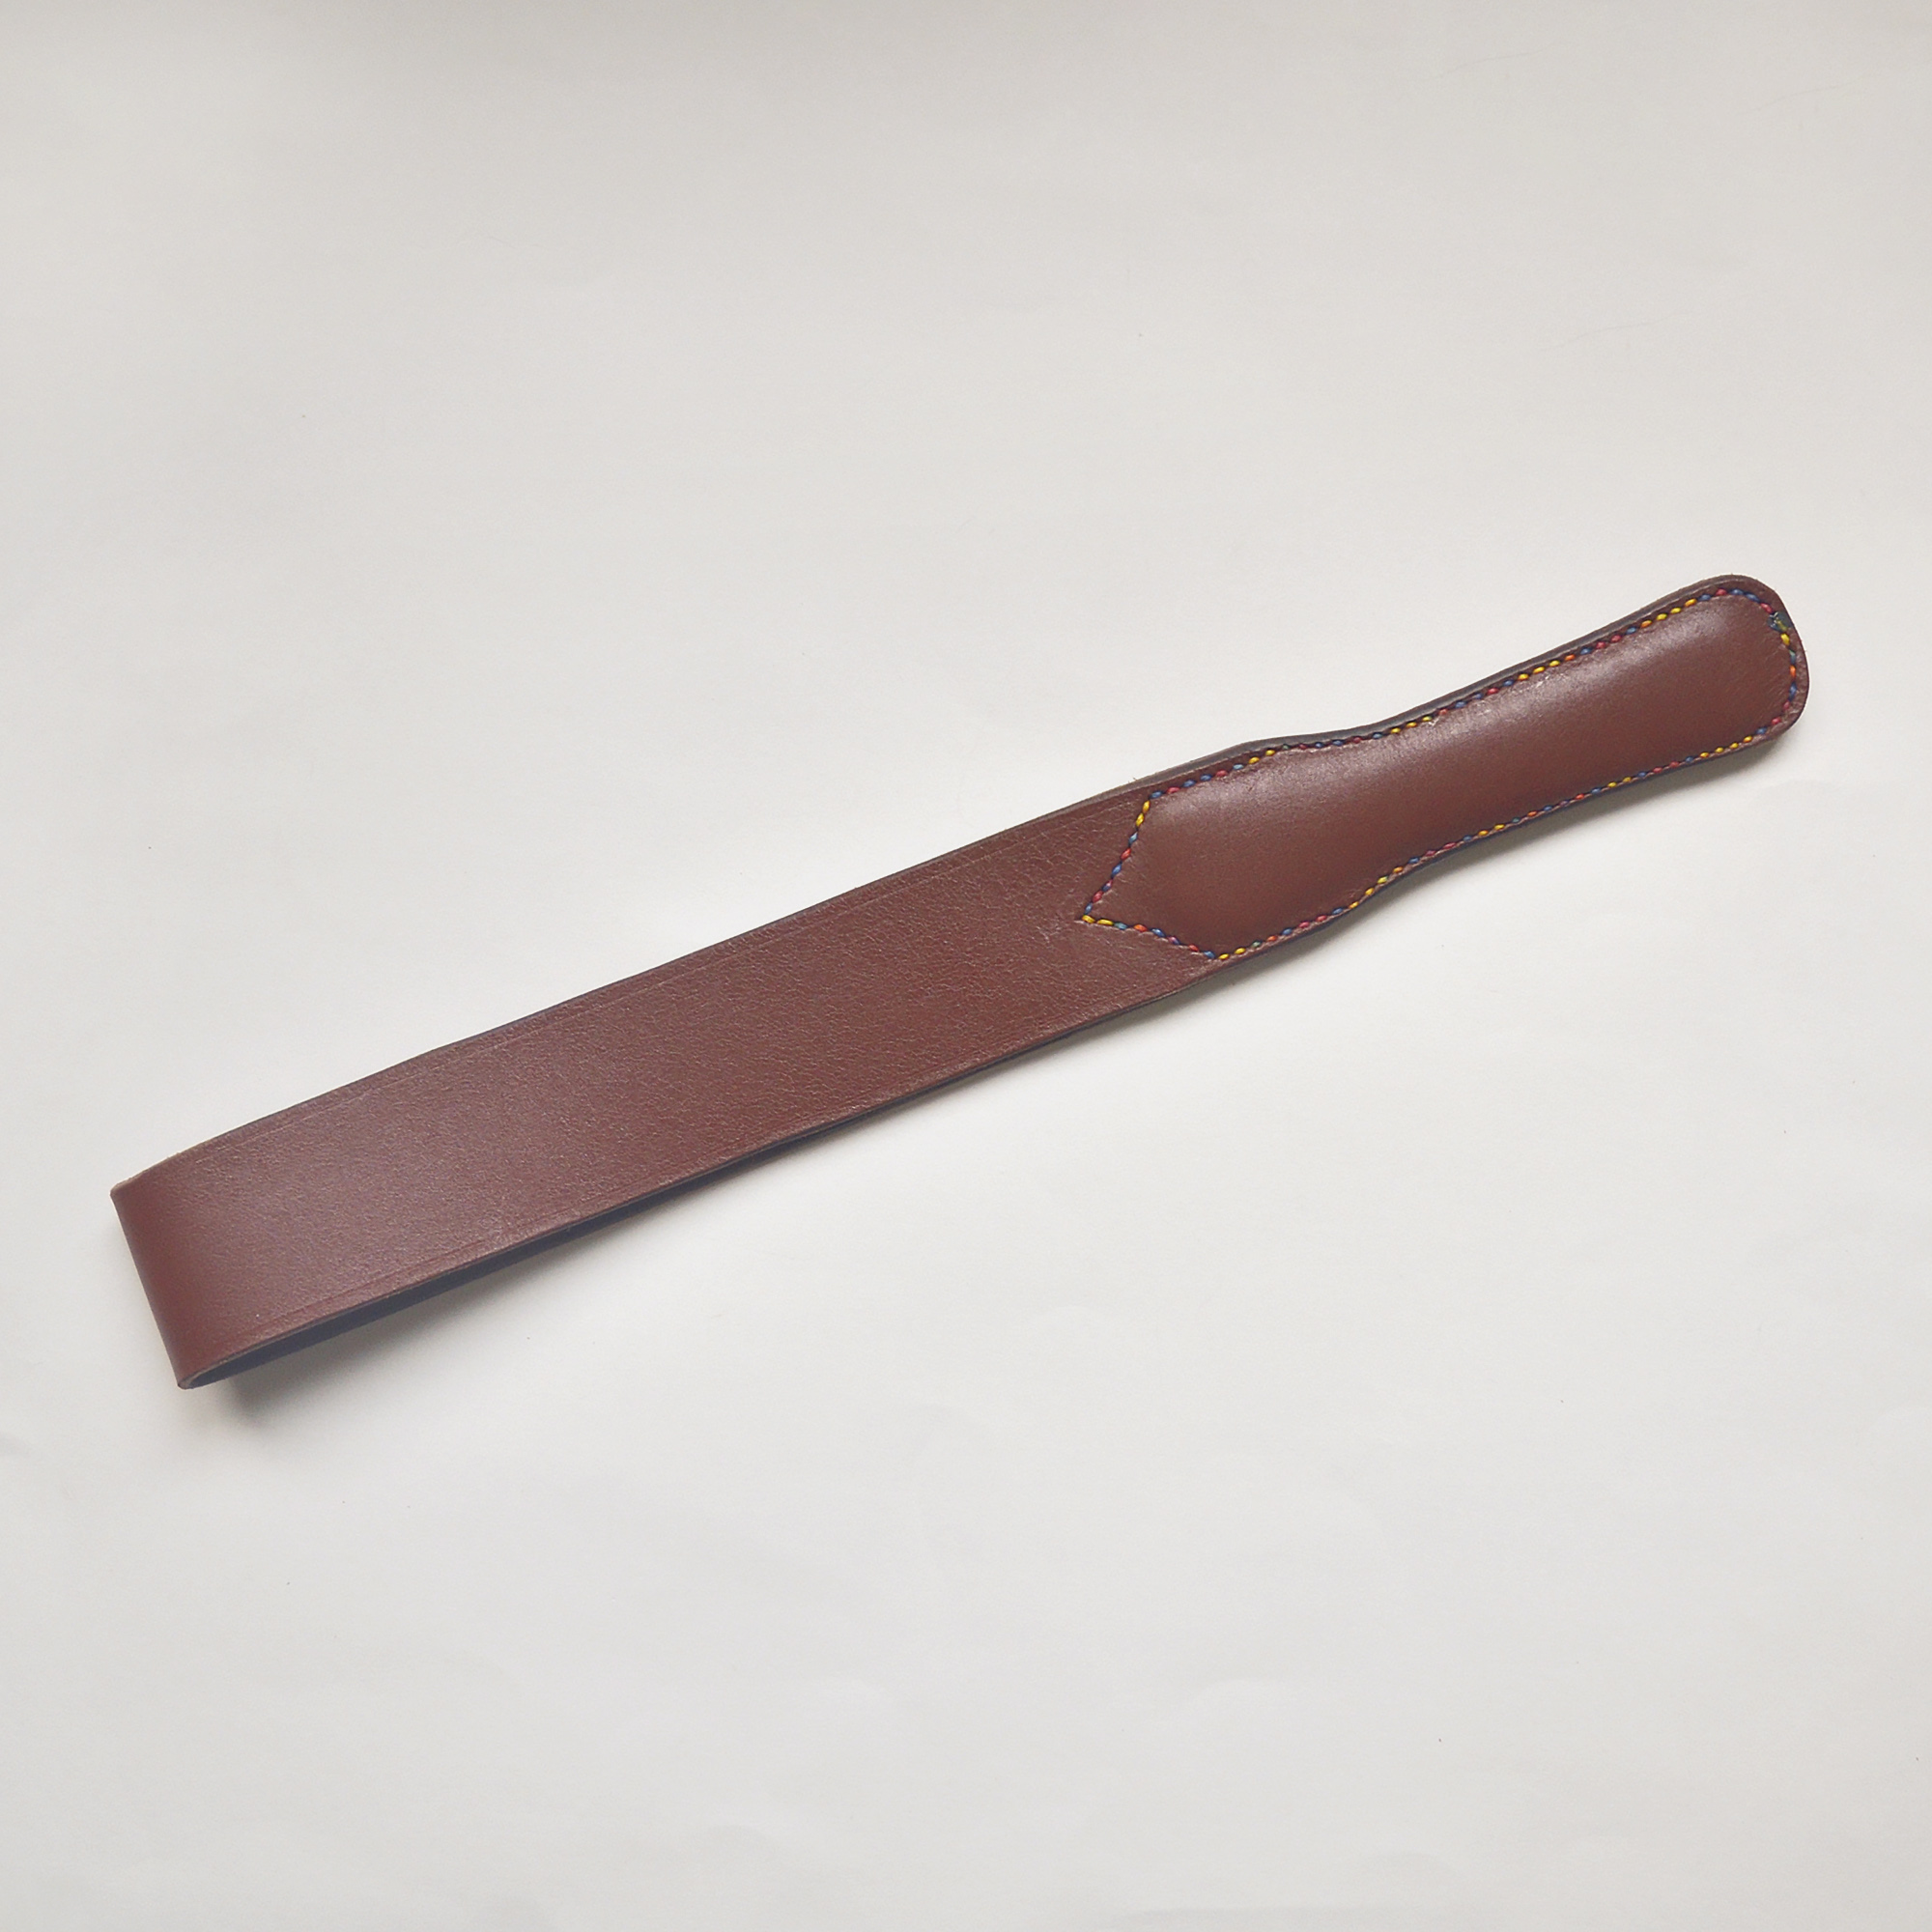 Looking for a Handmade Leather Spanking Paddle?